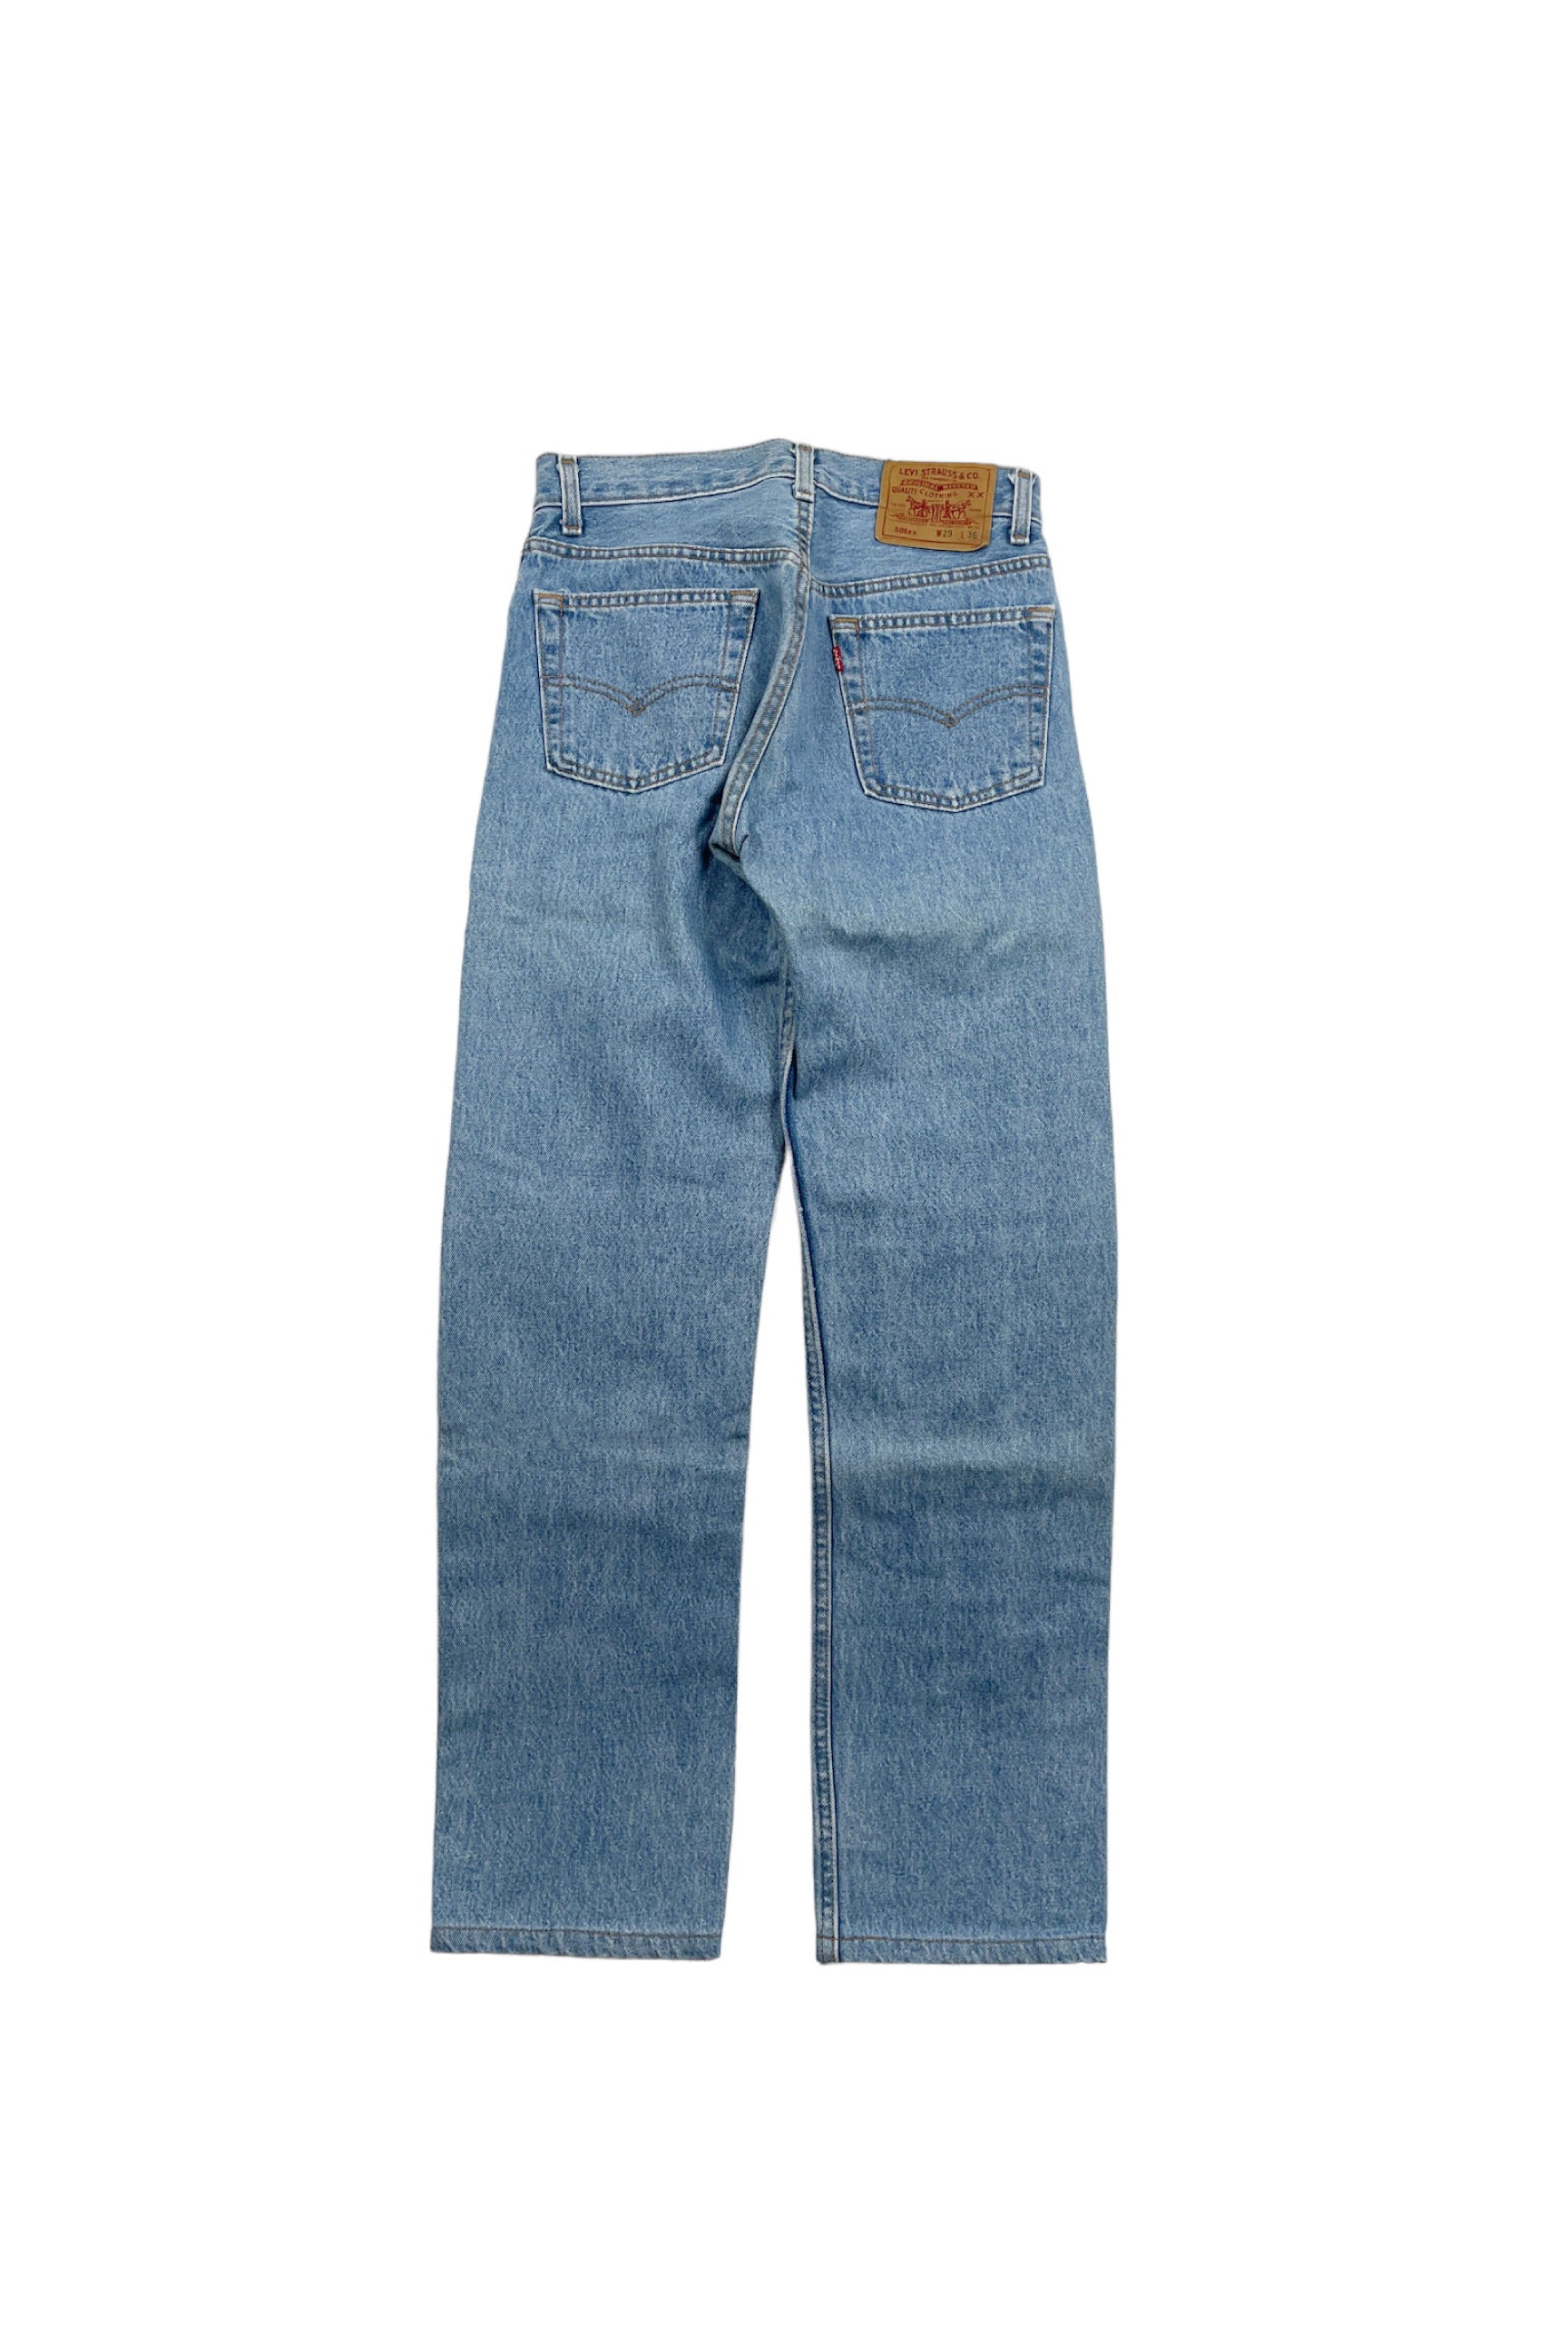 90's Made in USA Levi's 501XX denim pants – ReSCOUNT STORE